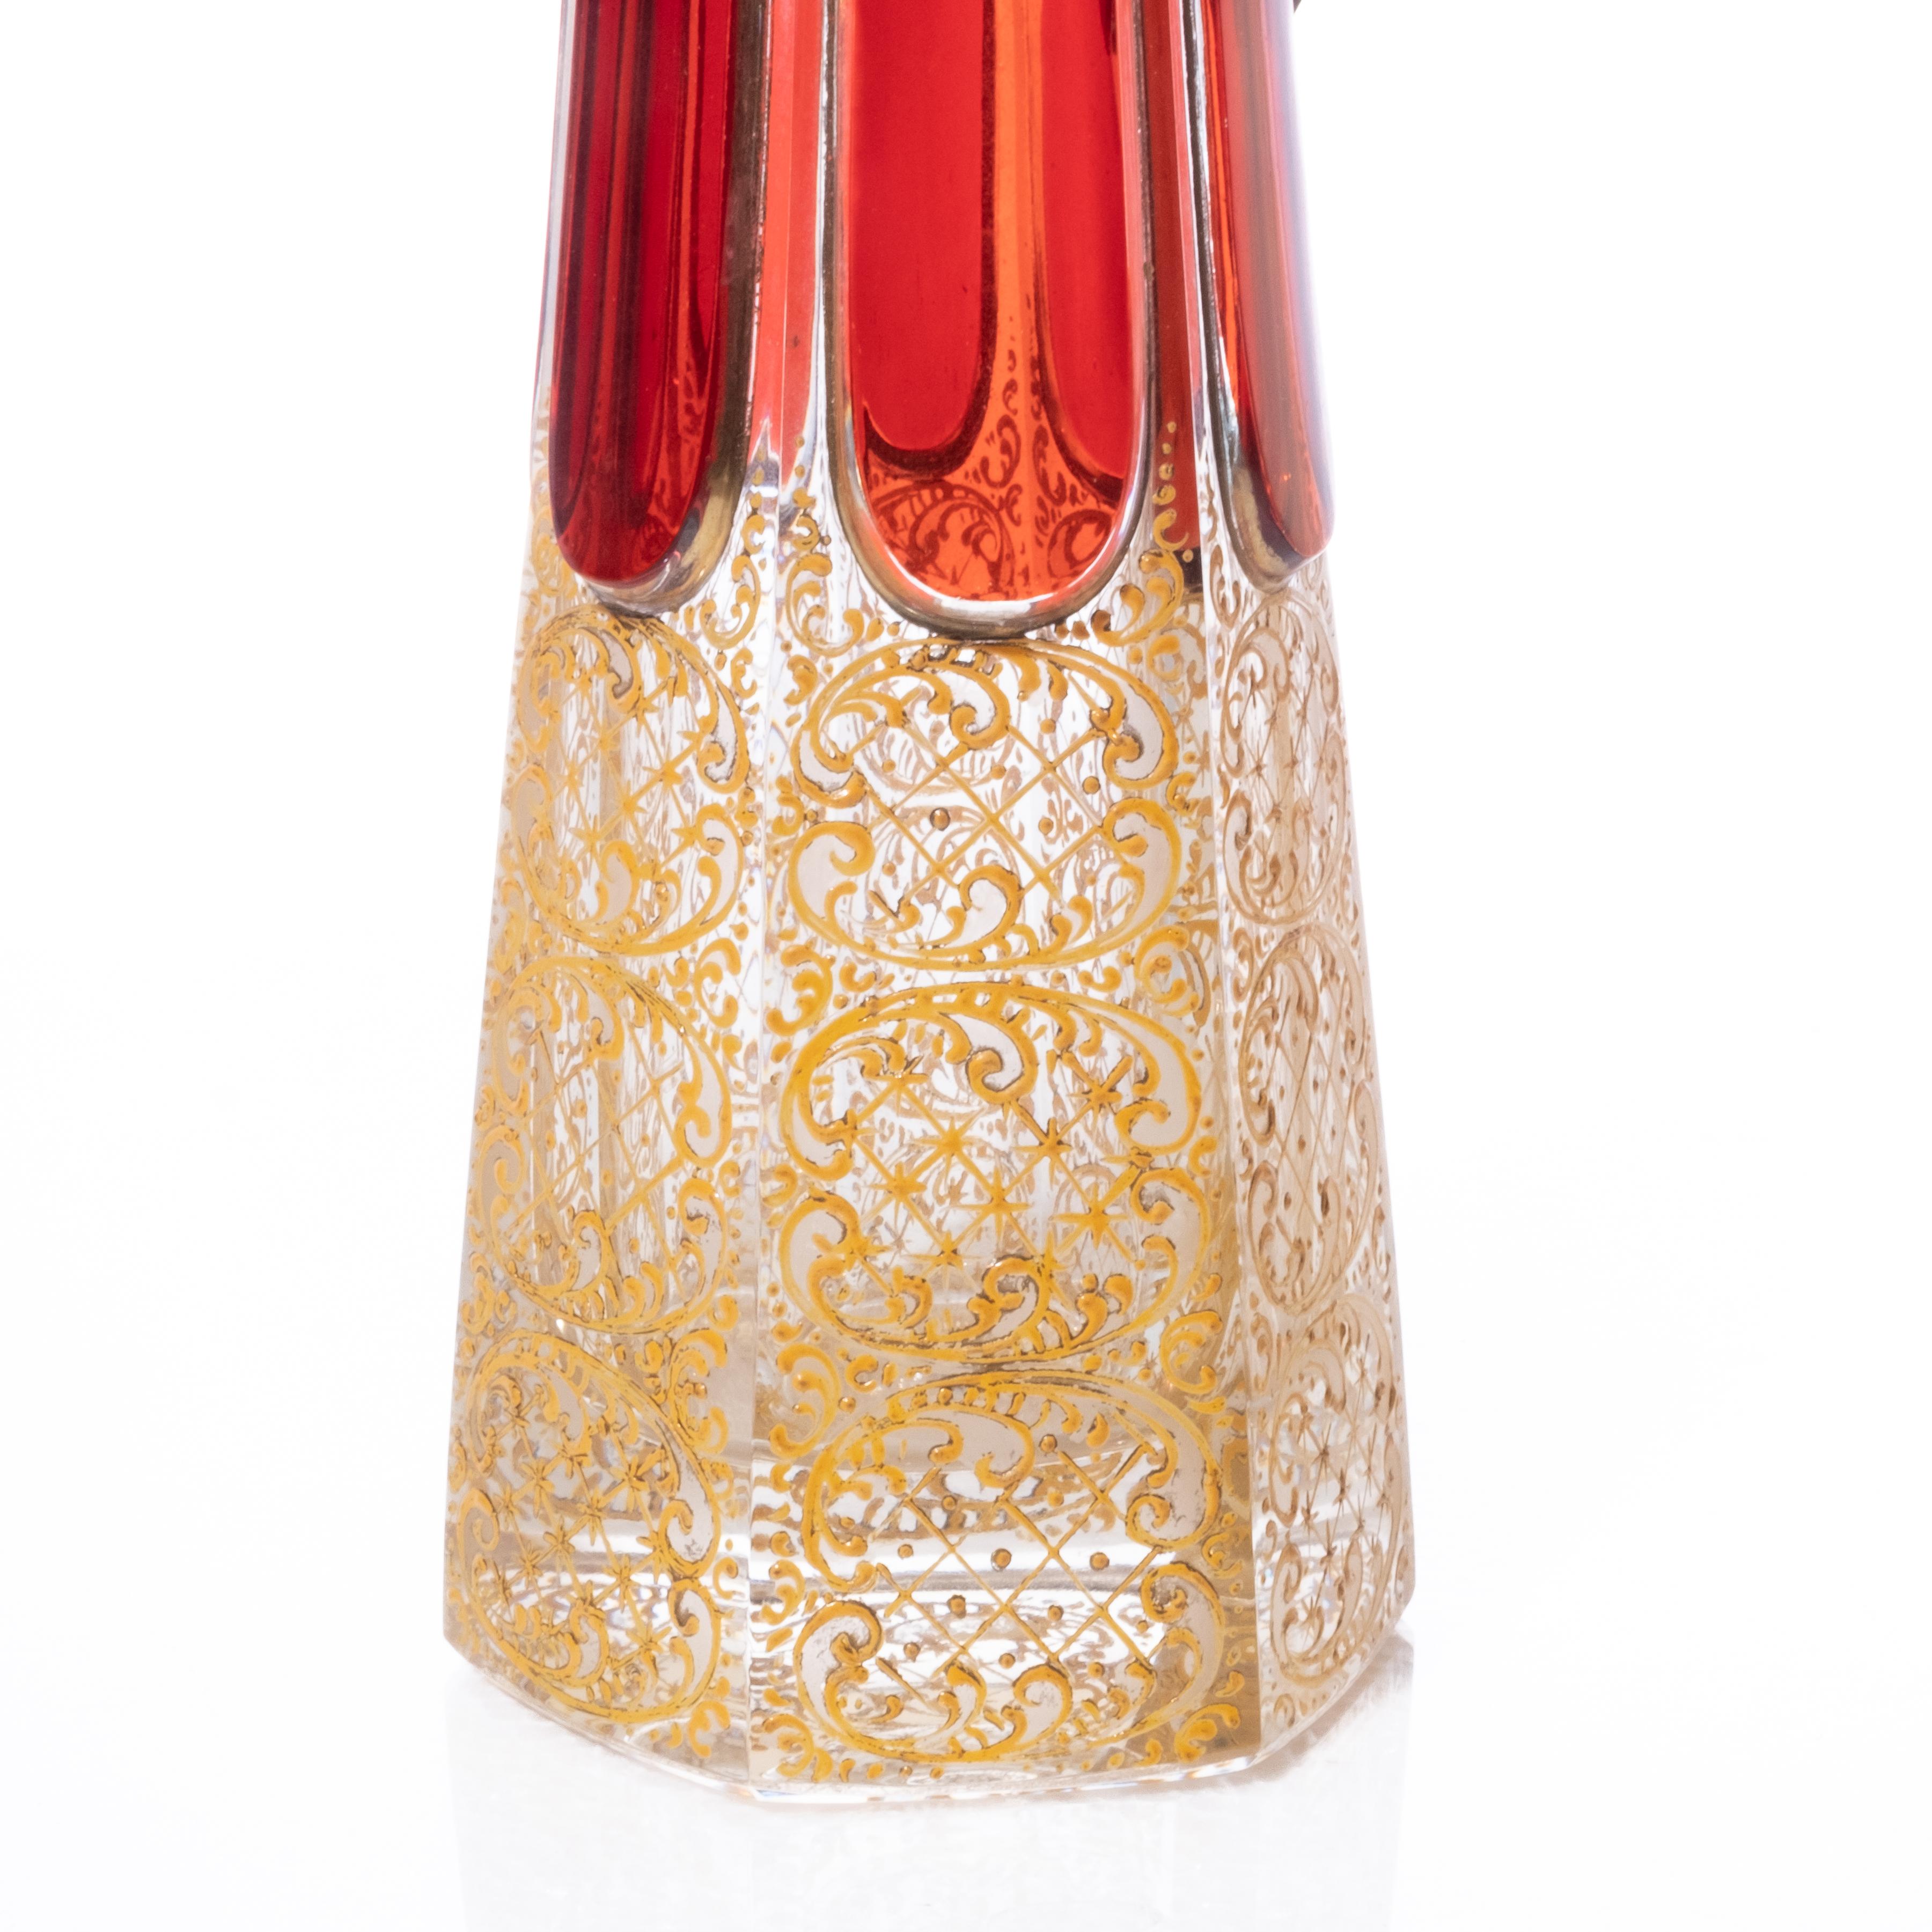 20th Century Refined Art Nouveau-Period Enameled Crystal Decanter, circa 1900